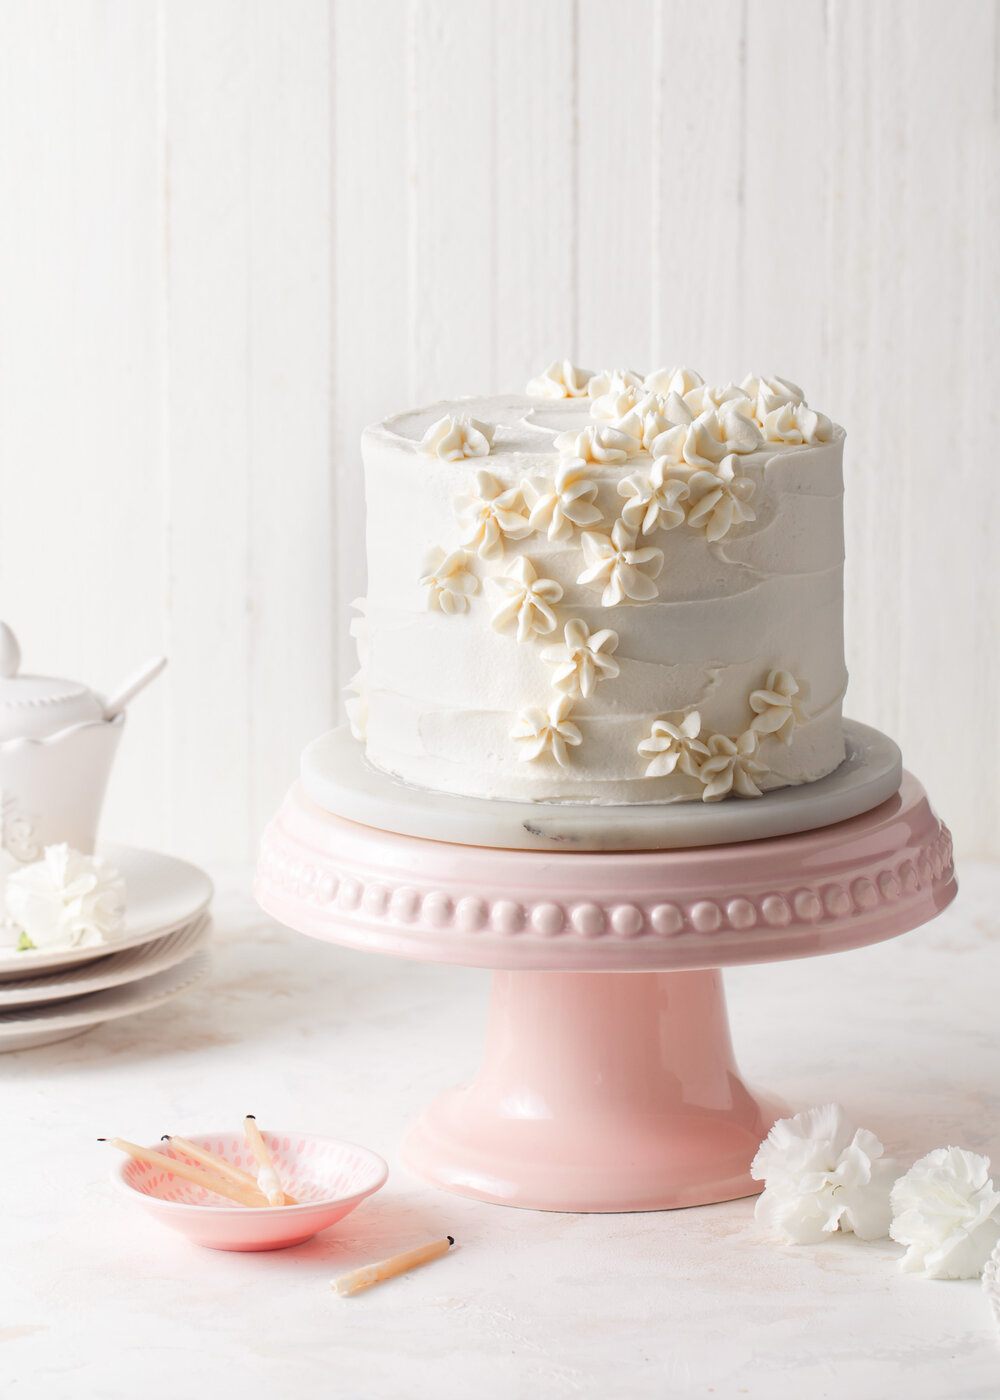 6-inch Vanilla Layer Cake with whipped crème fraîche frosting